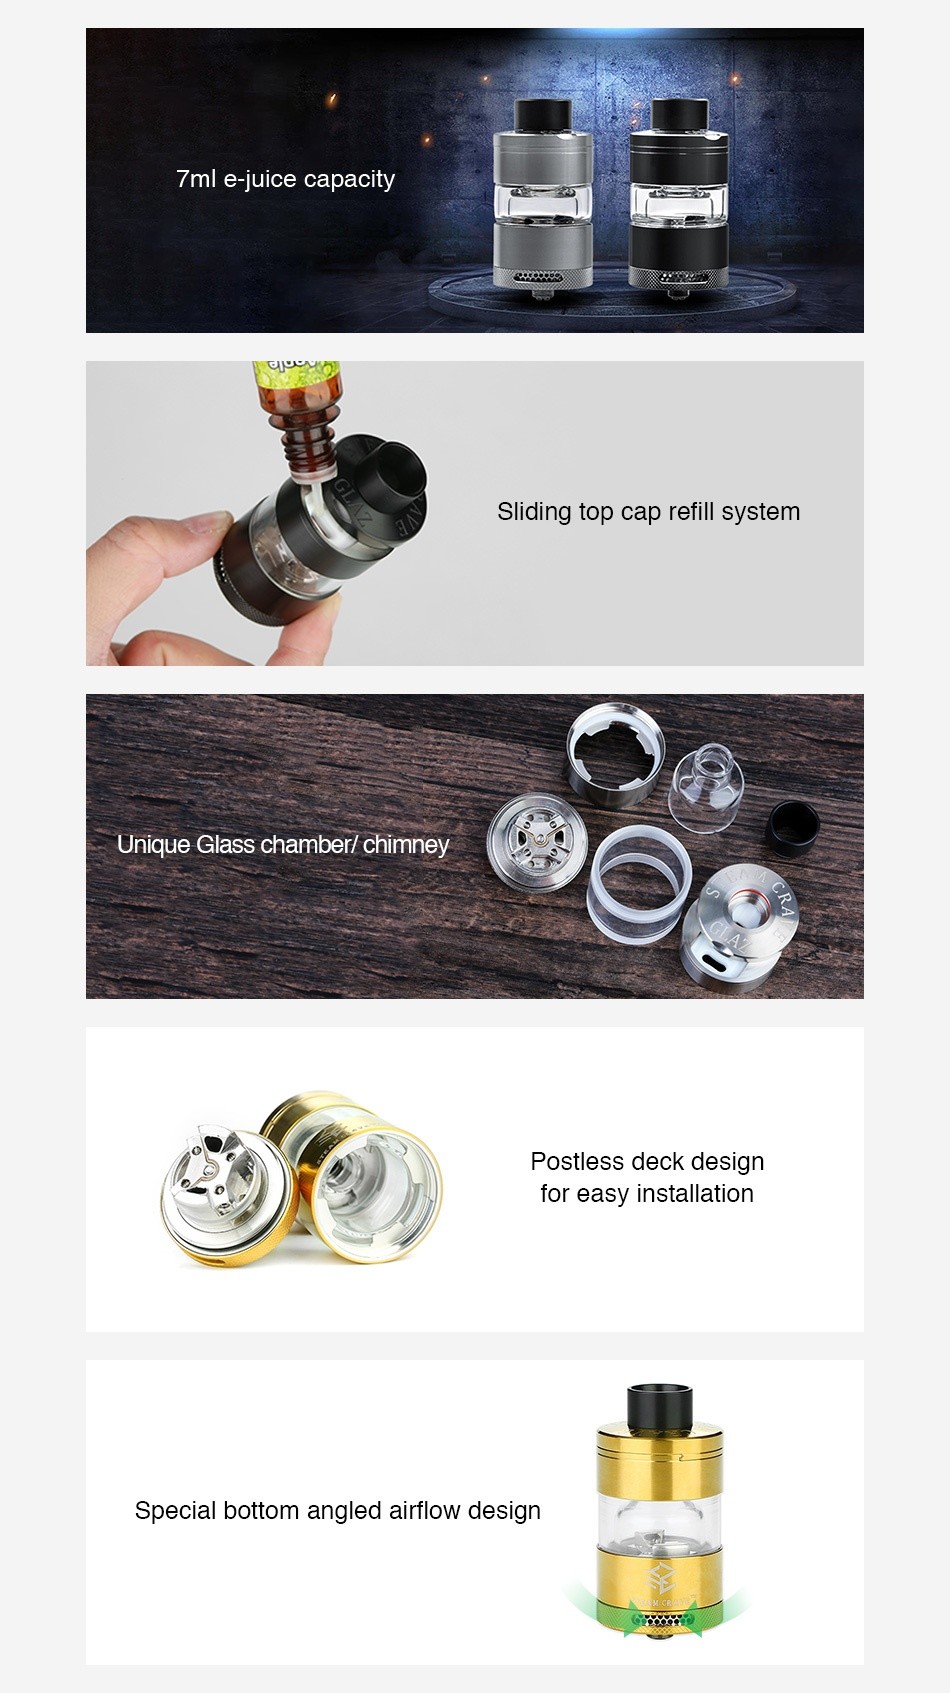 Steam Crave Glaz RTA 7ml 7ml e juice capacity Sliding top cap refill system Unique Glass chamber  chimney Postless deck design for easy installation Special bottom angled airflow design